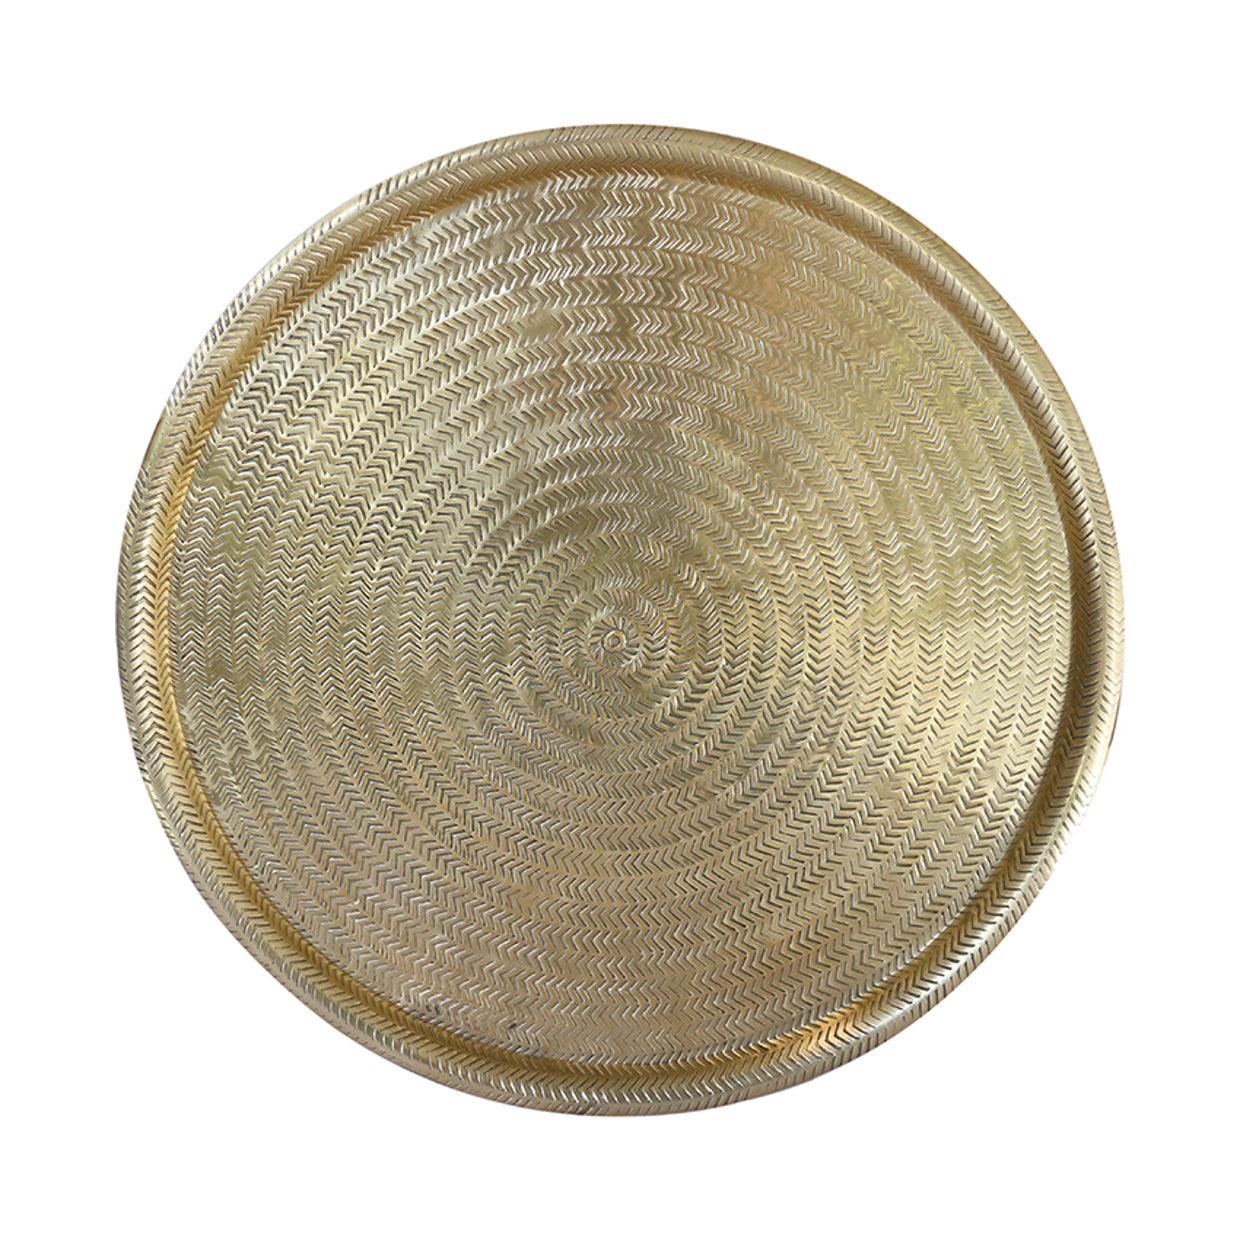 Ravello Medium Etched Tray in Antique Brass Finish